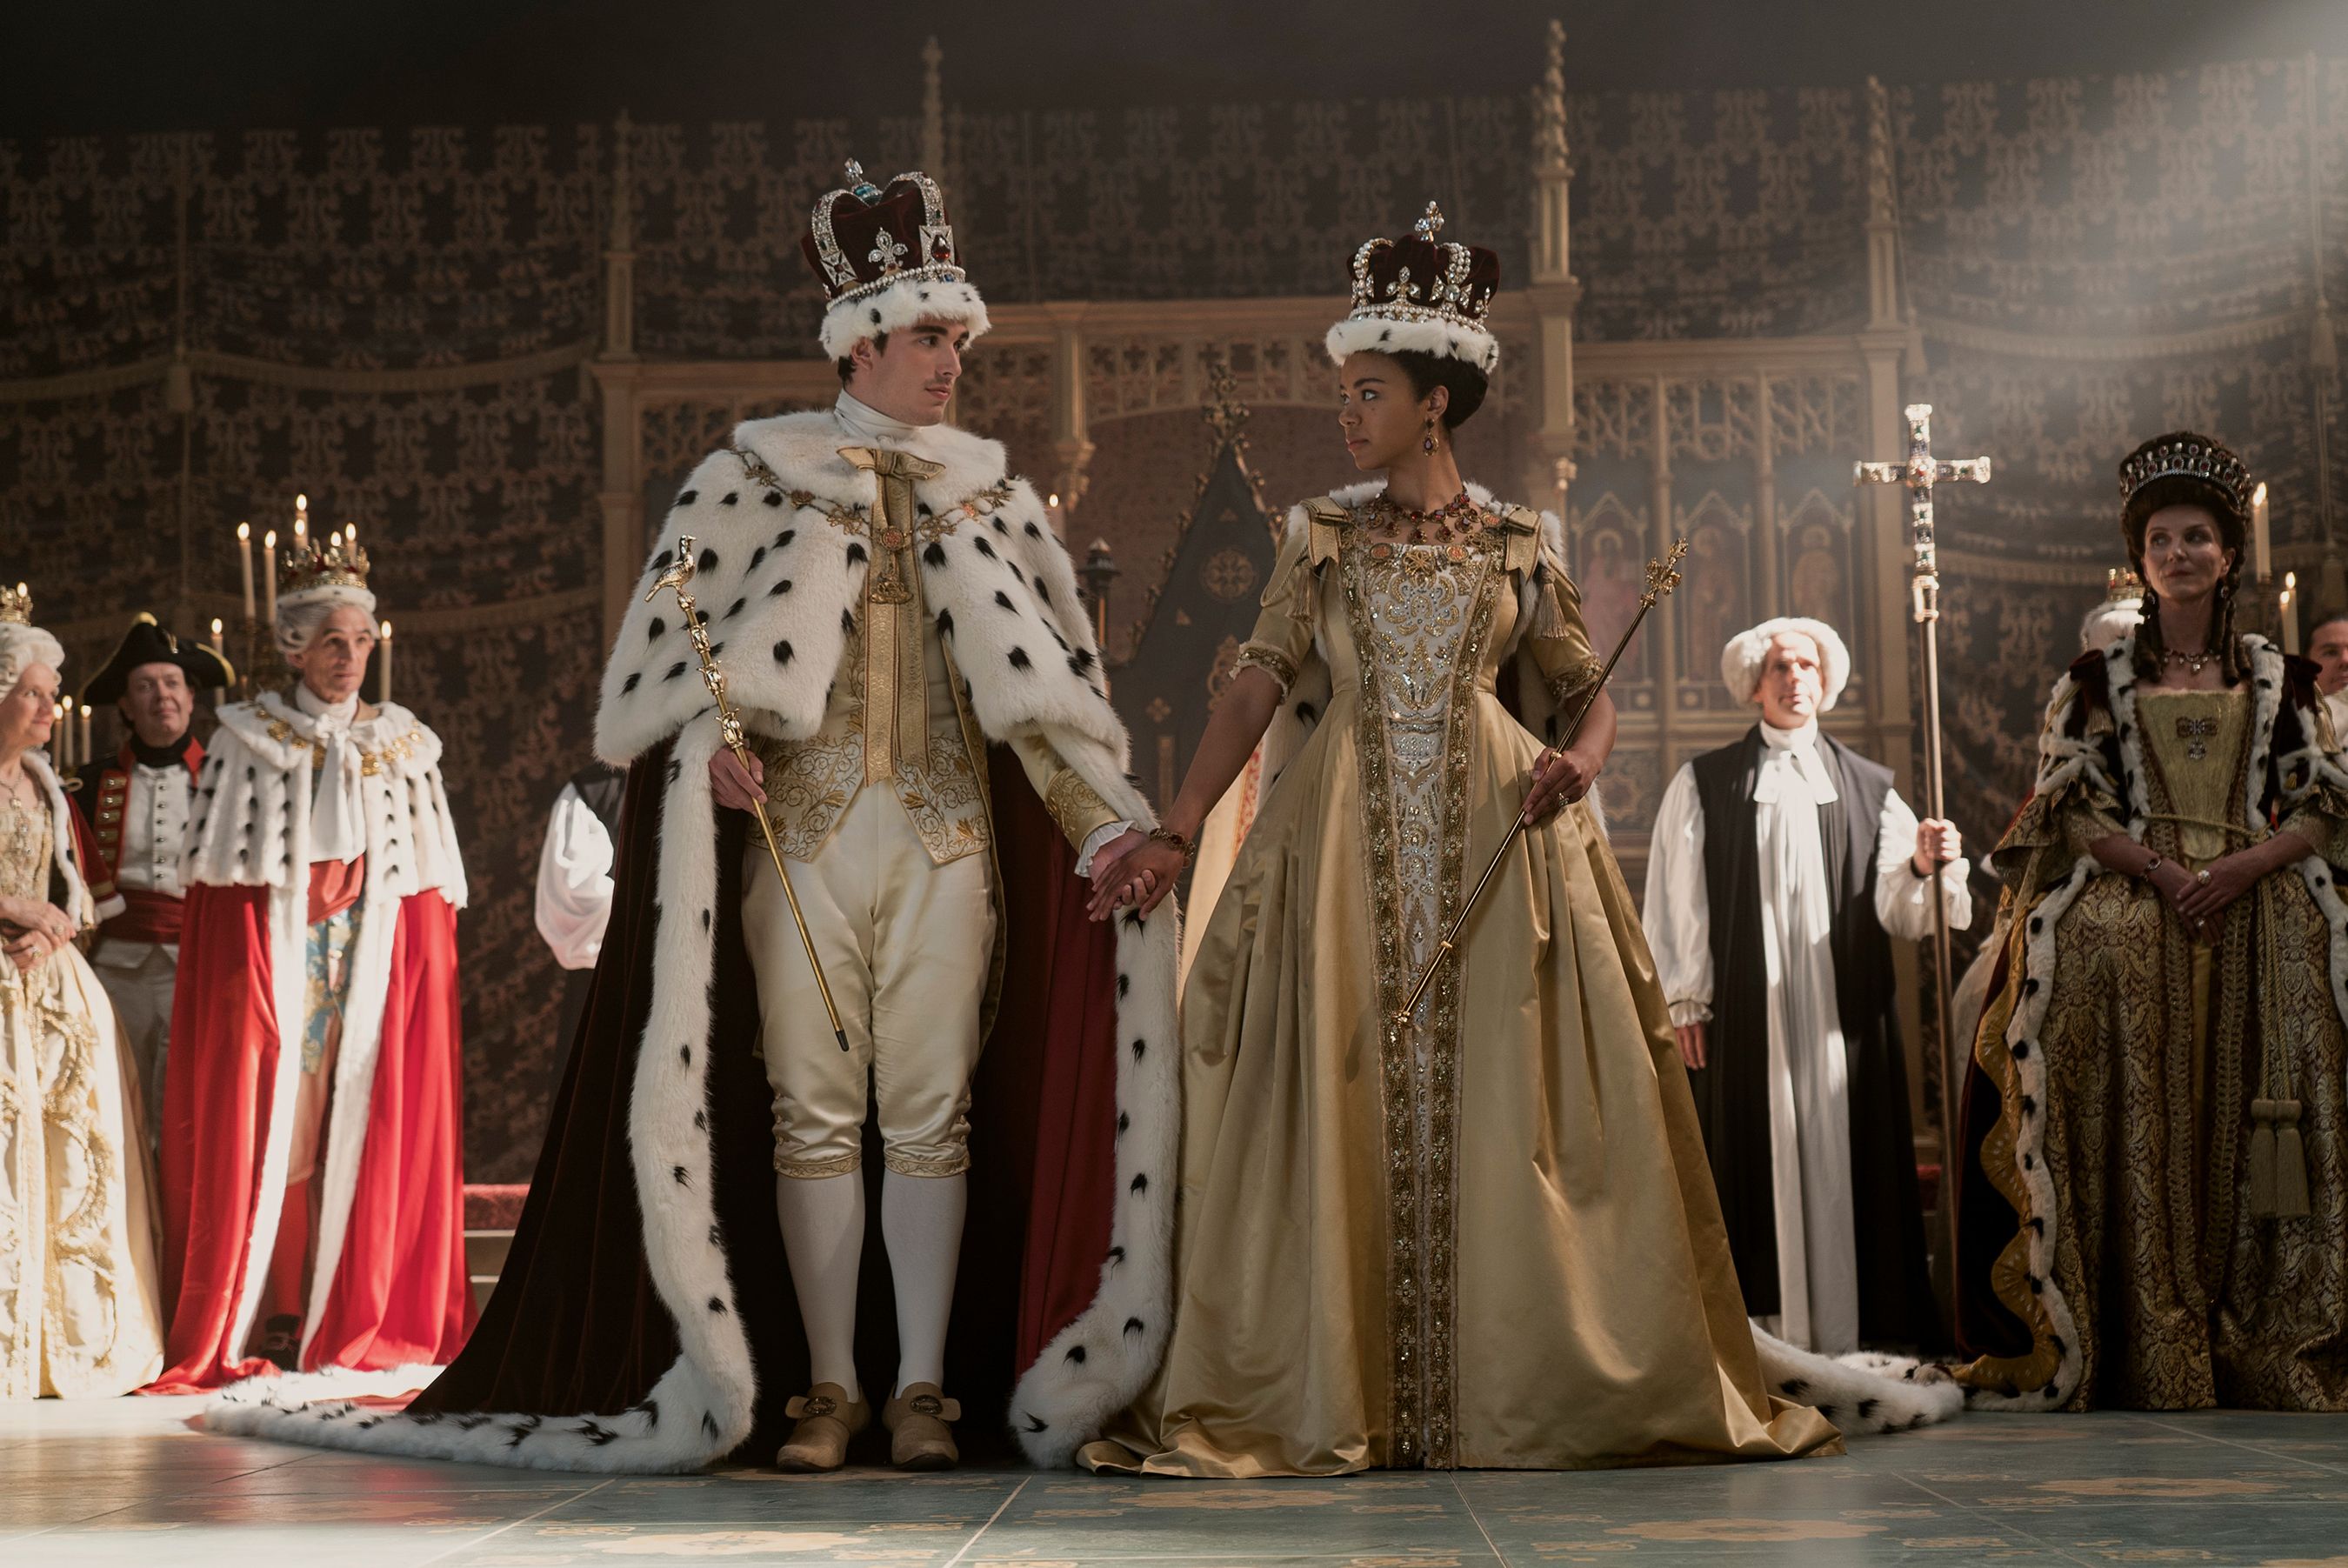 TheTrue Story of King George & Queen Charlotte's Coronation